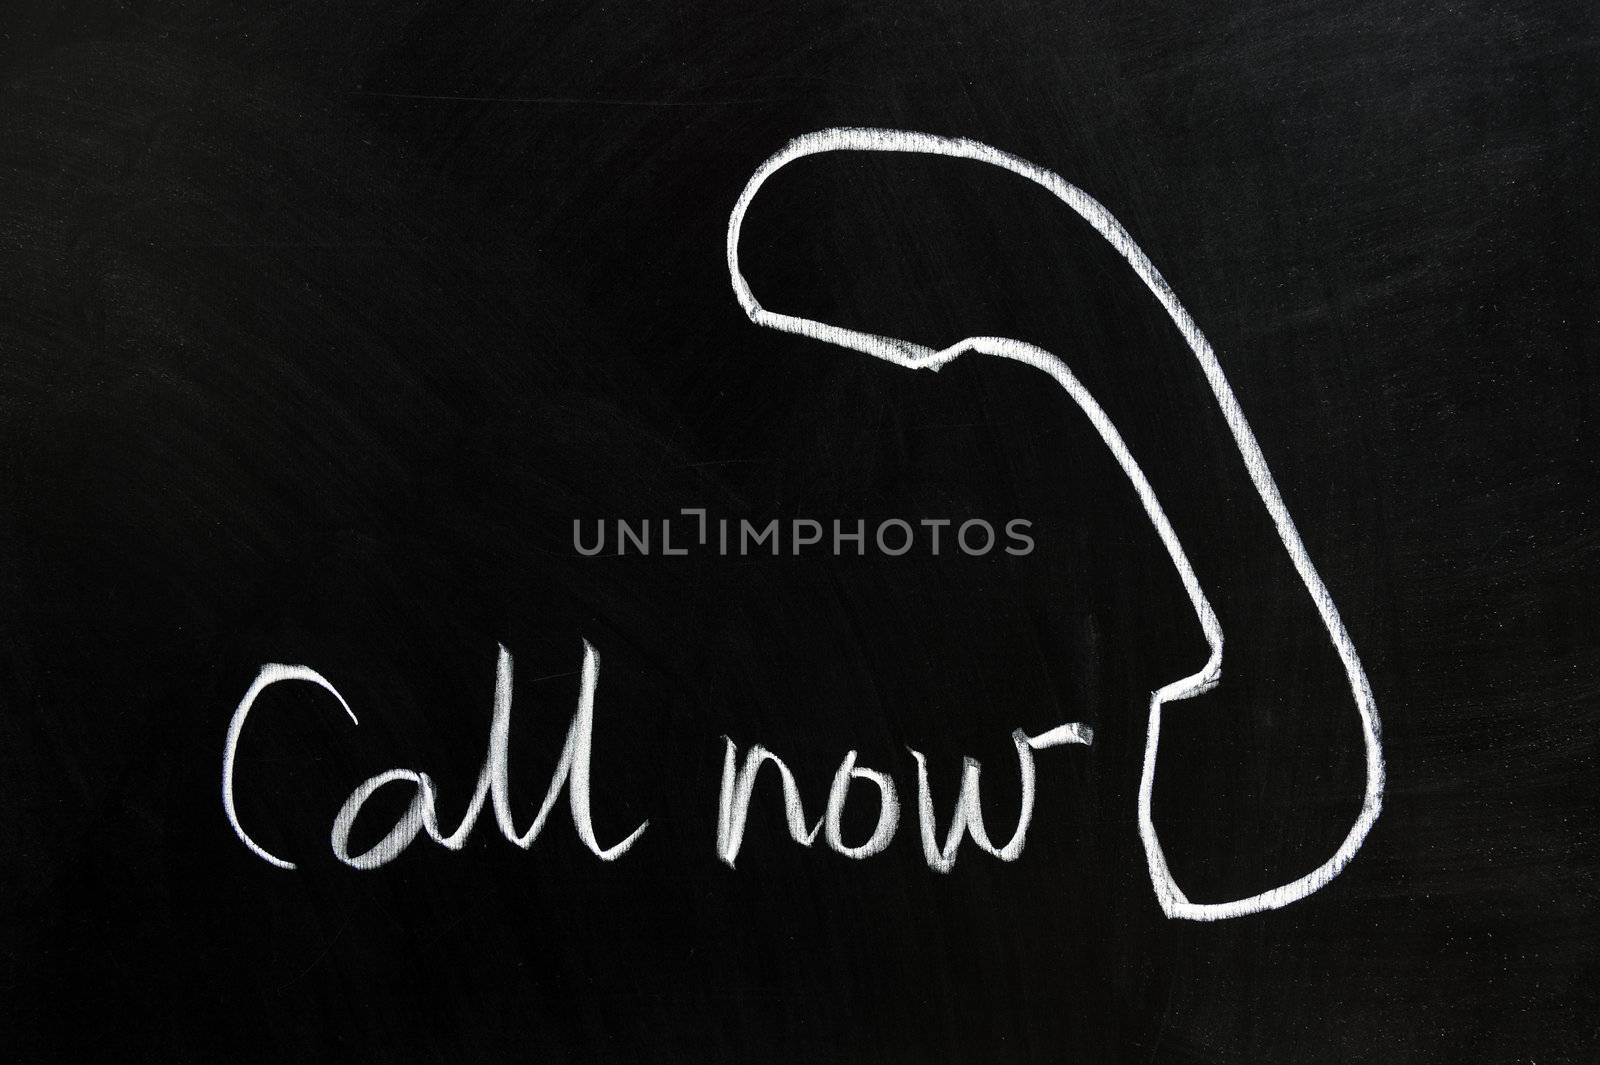 Call now by raywoo